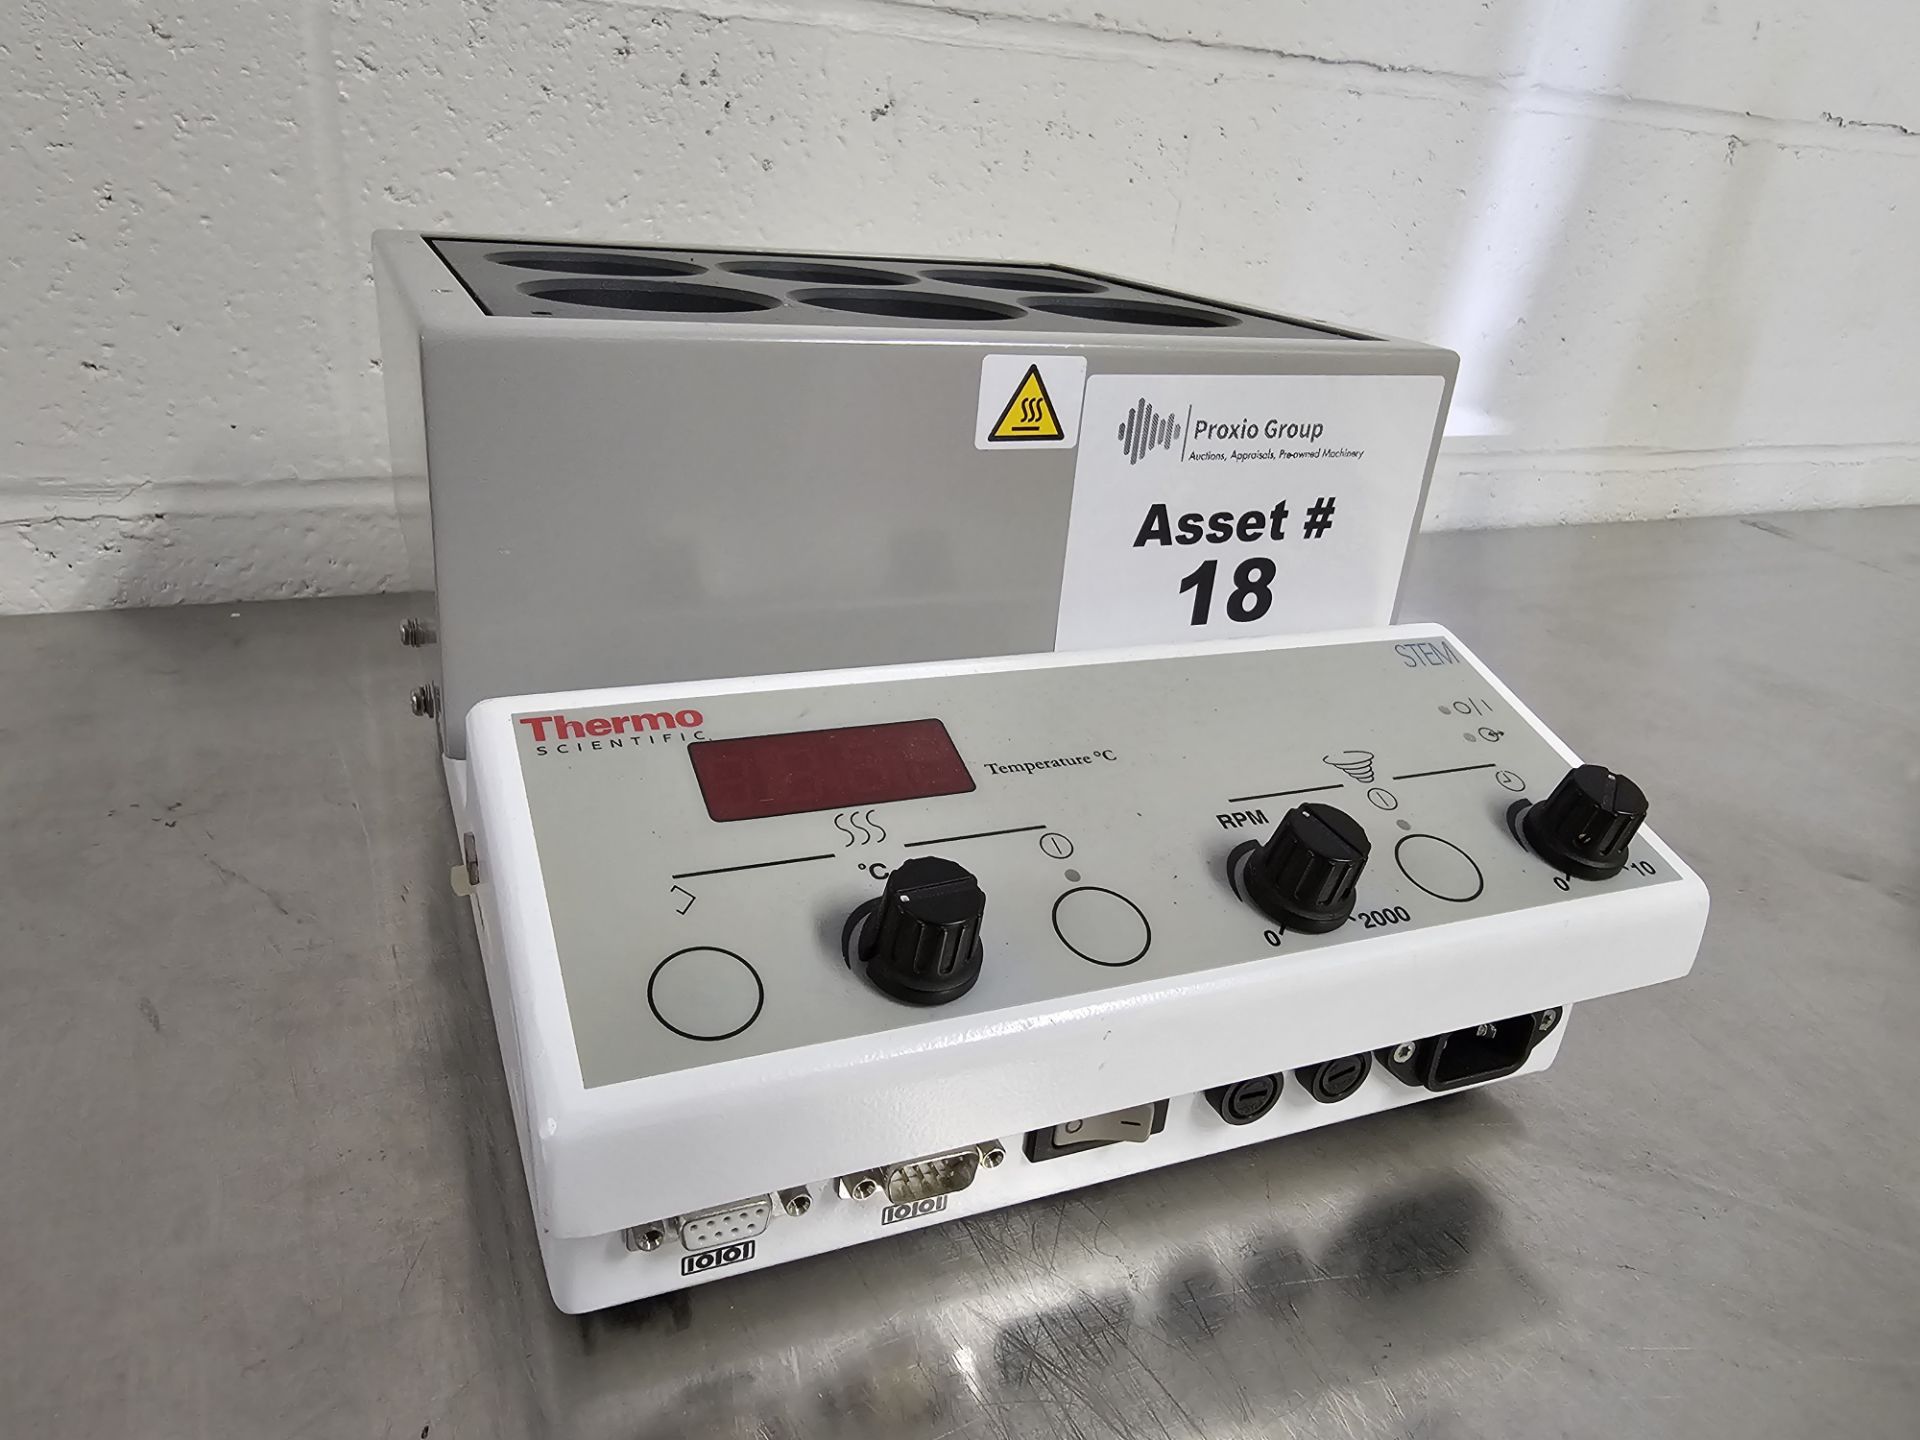 Thermo Scientific / Electrothermal Model PS80043 STEM Series Reaction Station Dry Bath - Image 4 of 6